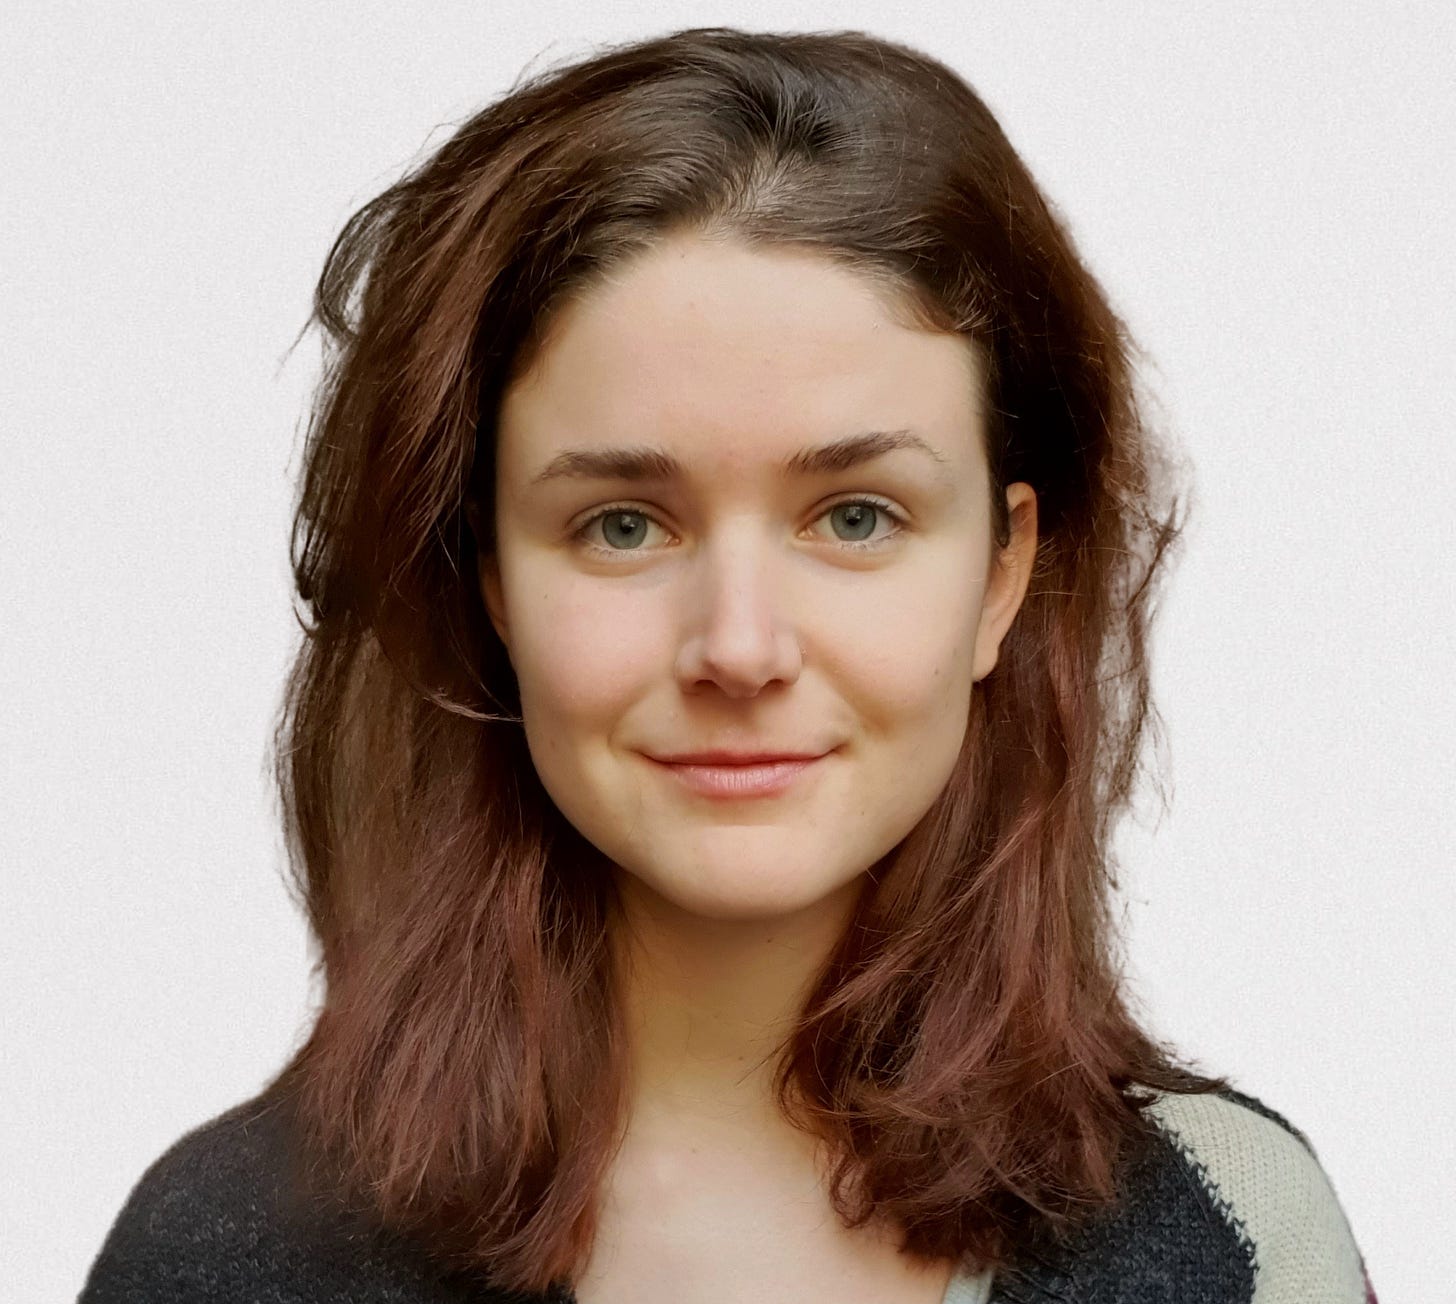 Headshot of young white woman with long brown hair smiling directly at camera